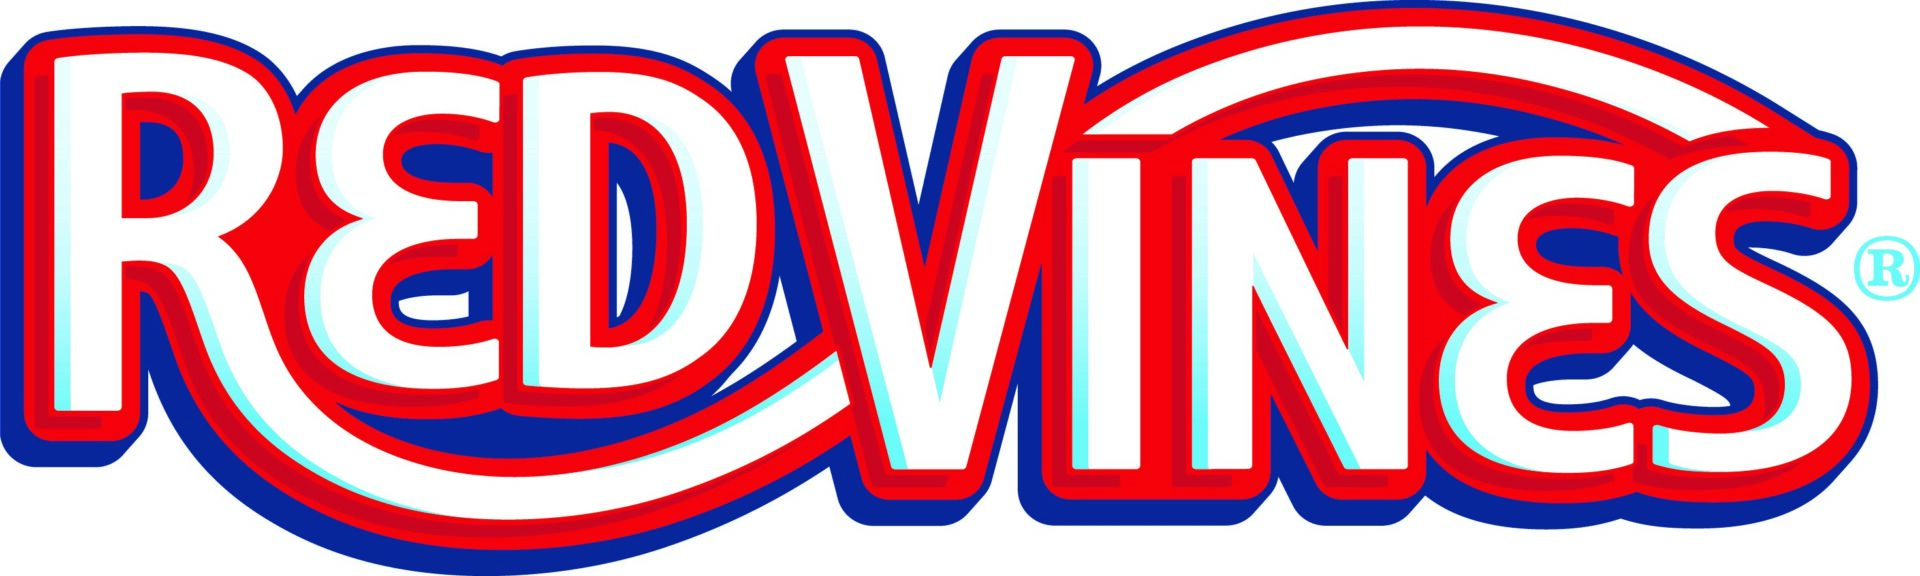 A red white and blue logo for the movie devil.